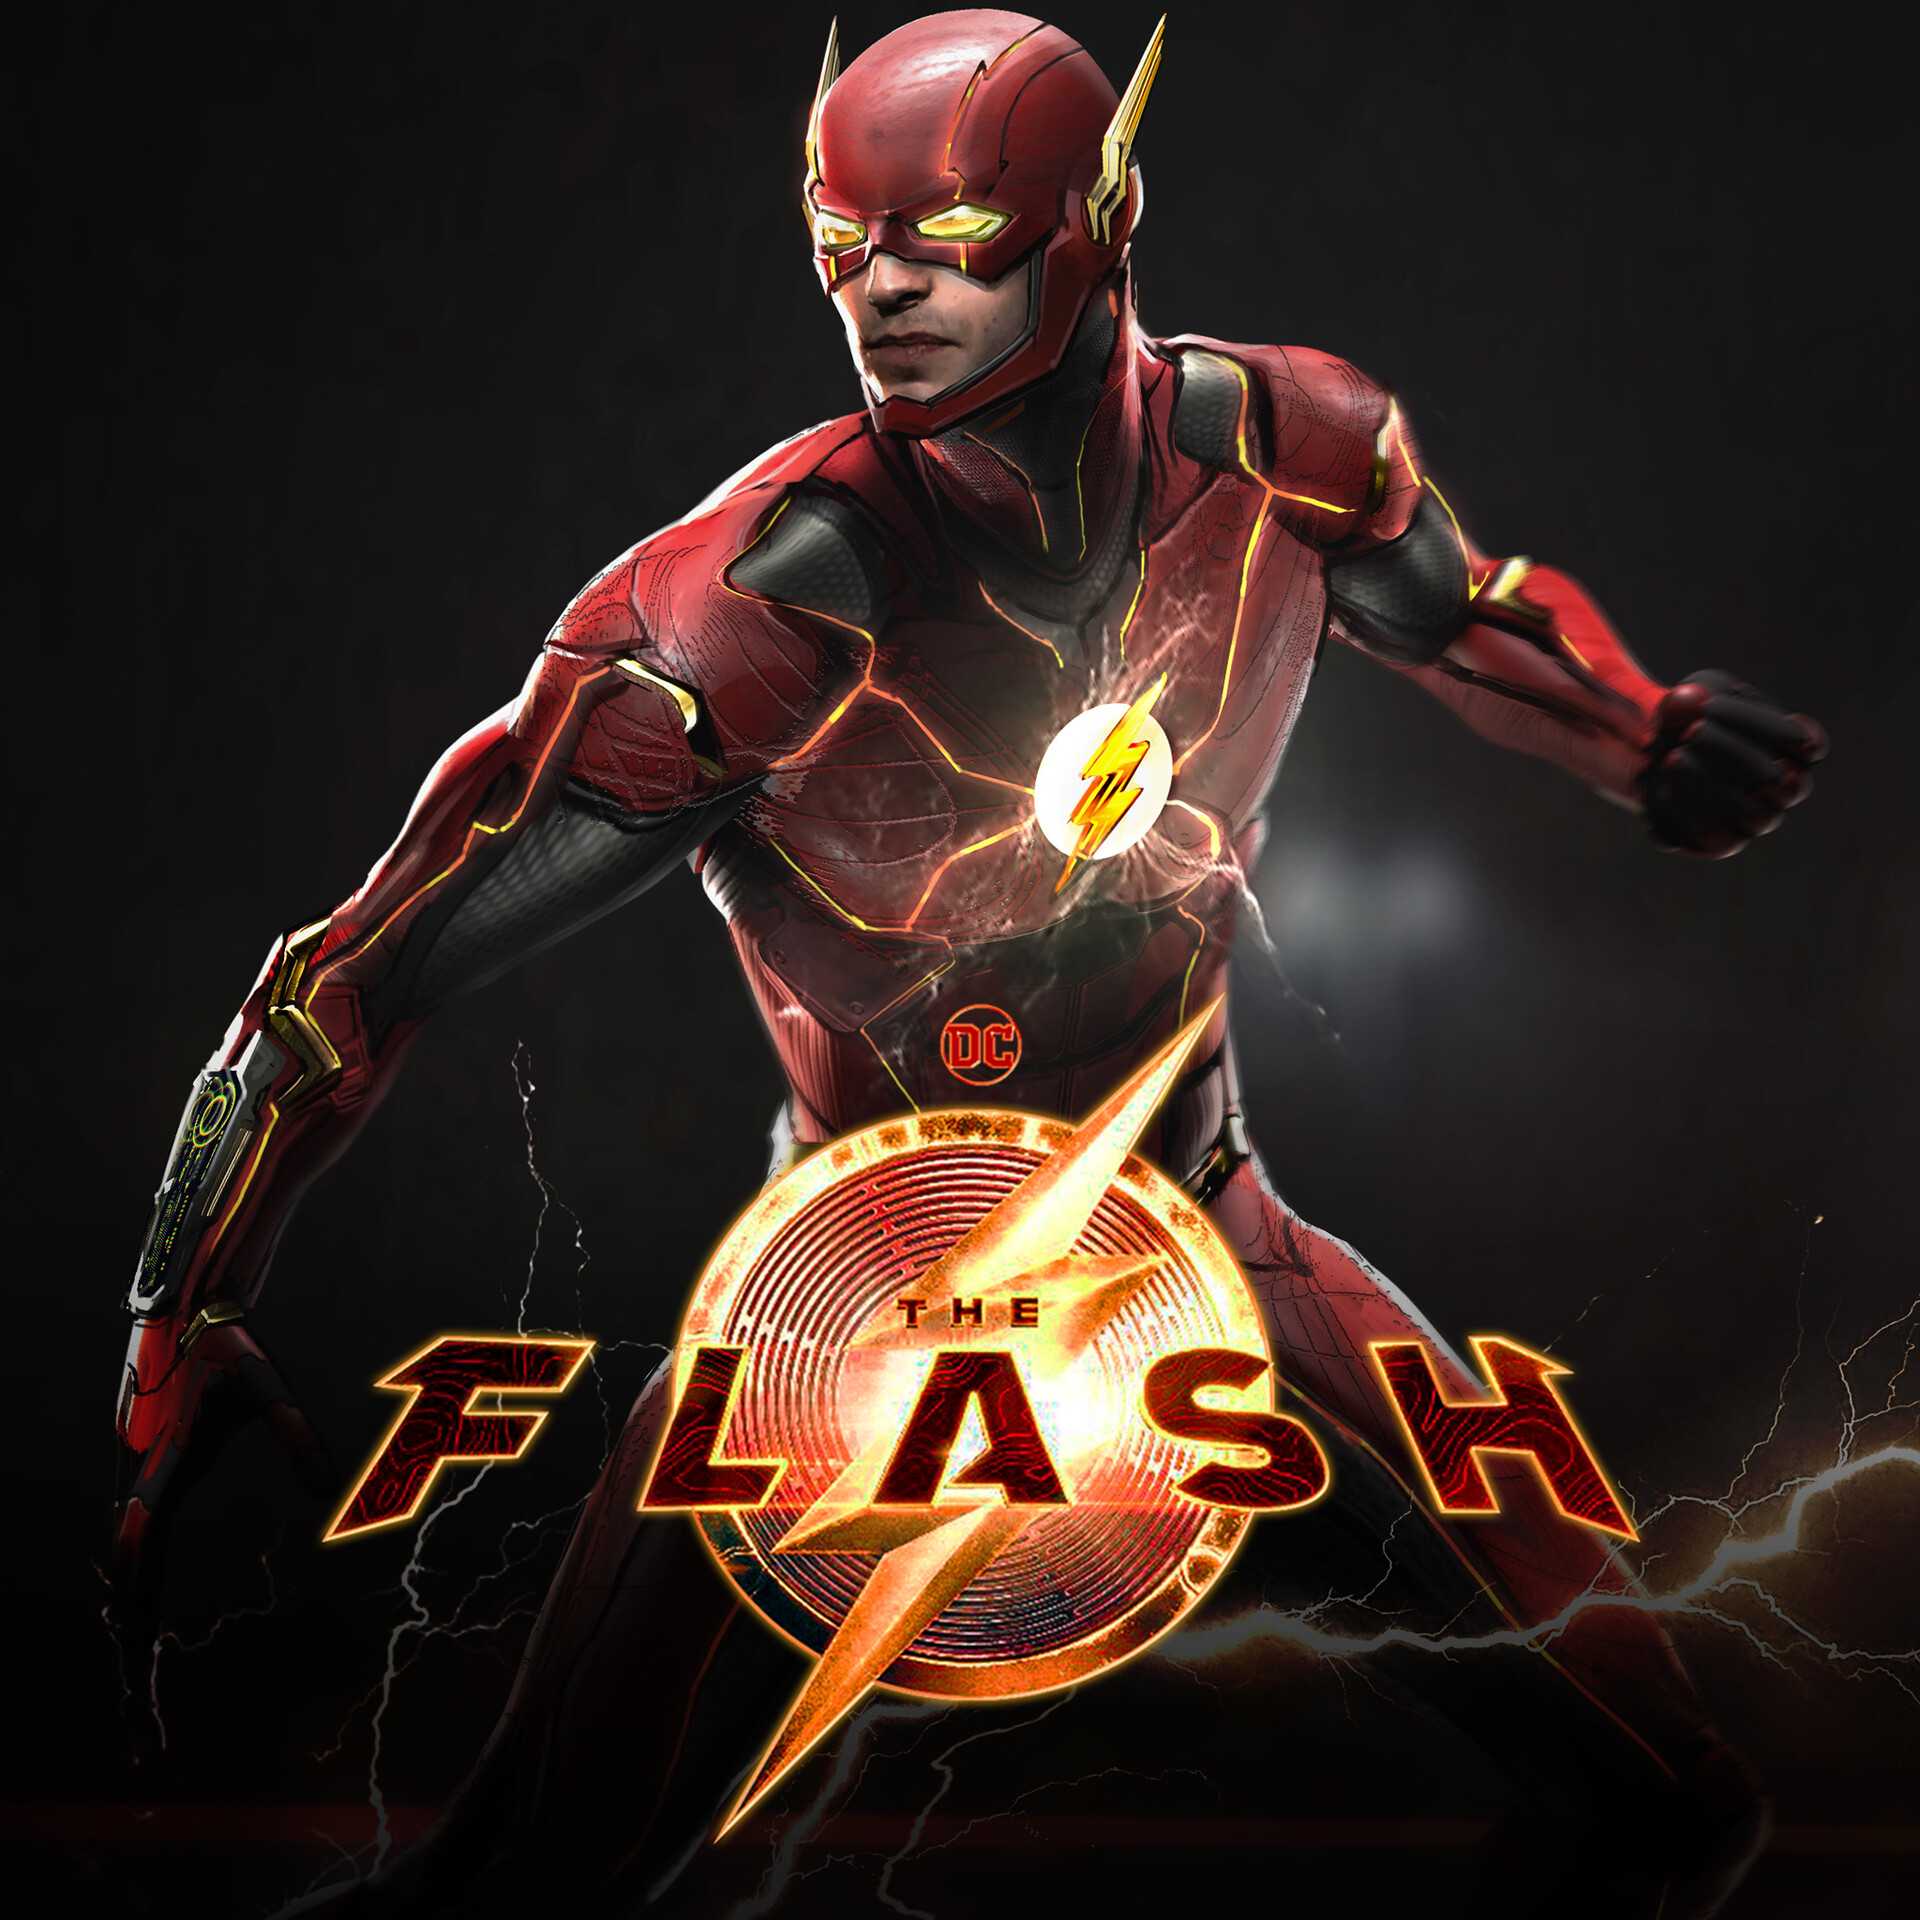 Unveiling Secrets: Post-Credit Surprises in 'The Flash' Keep Fans on Edge